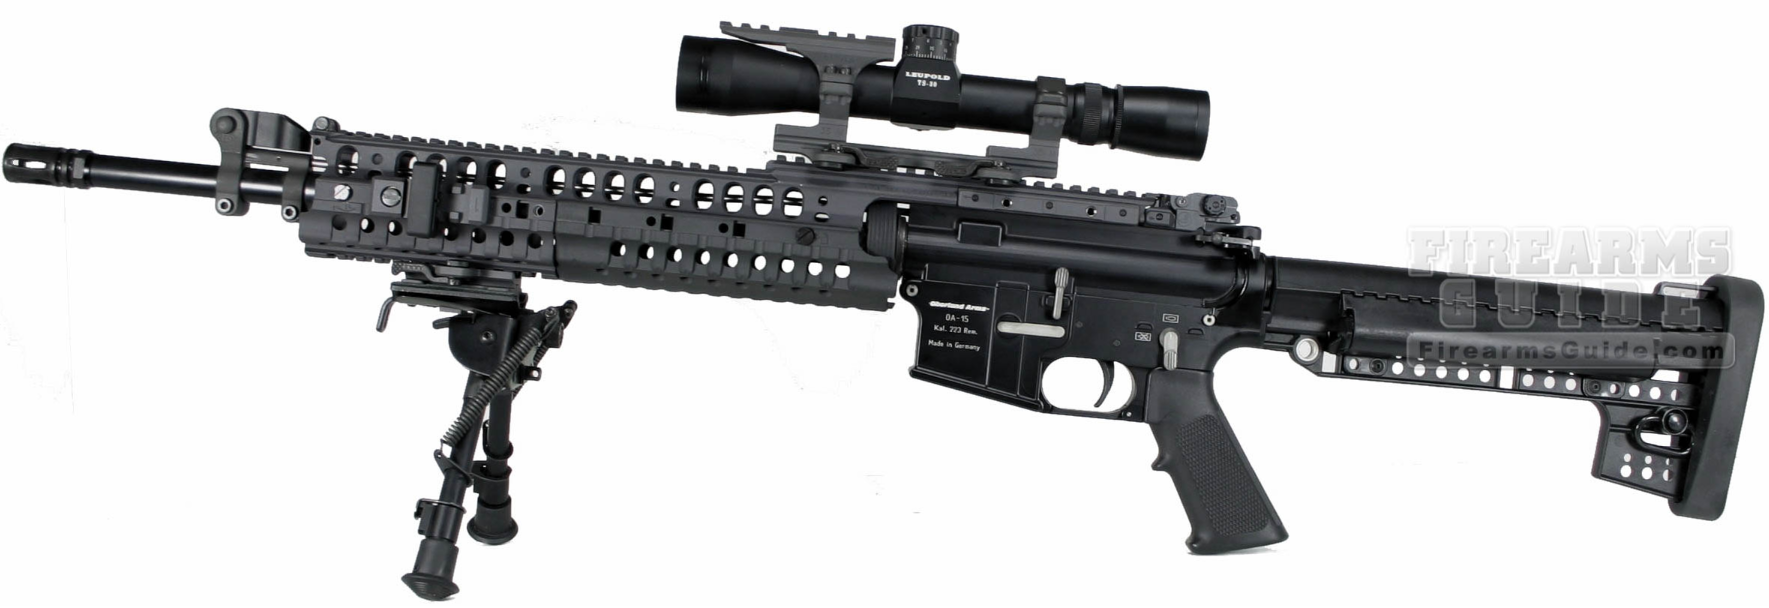 Oberland Arms OA-15 SPR II Special Purpose Rifle